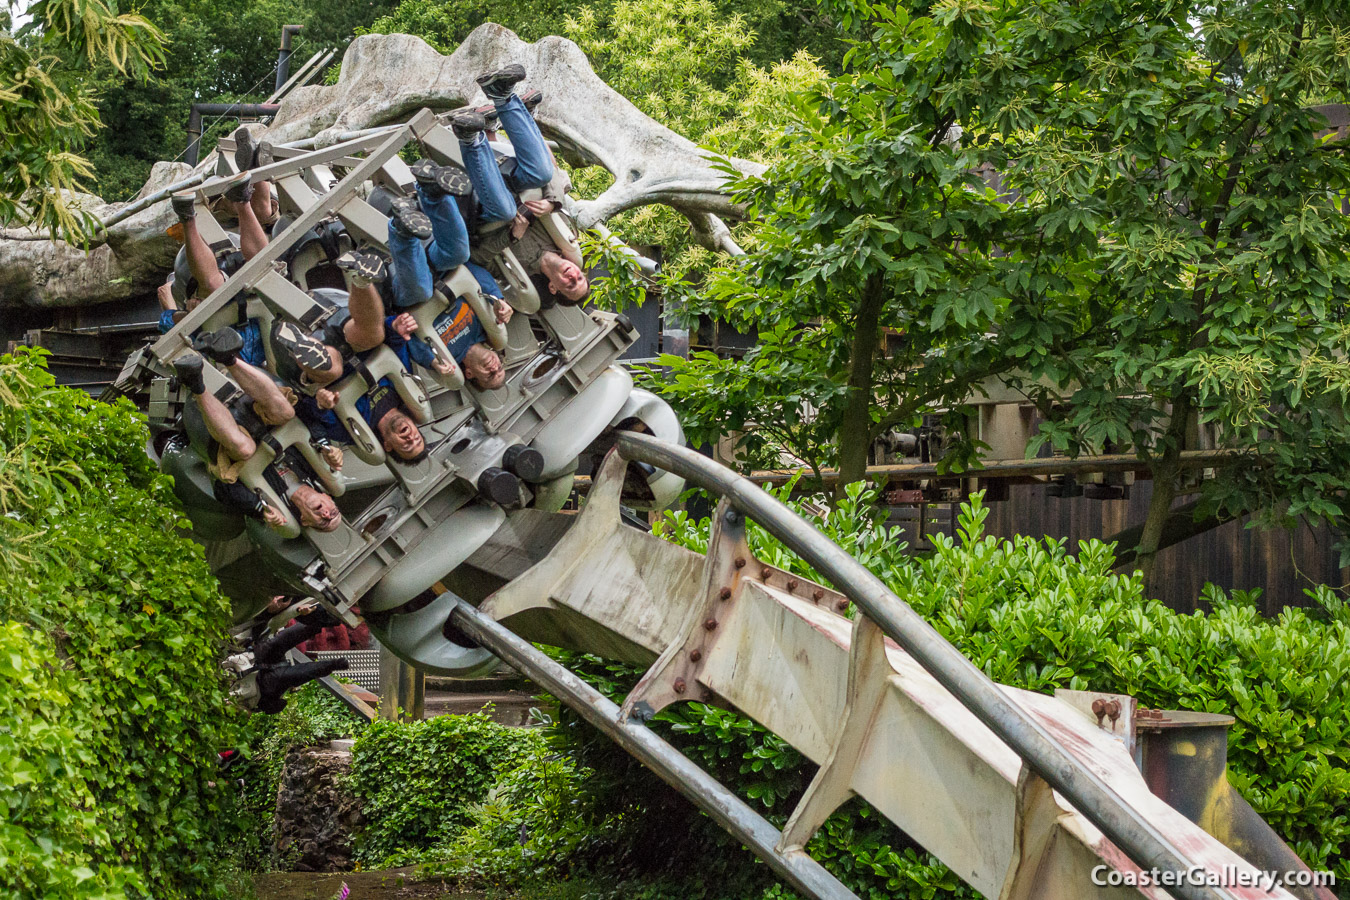 Pictures of the Nemesis inverted roller coaster at Alton Towers